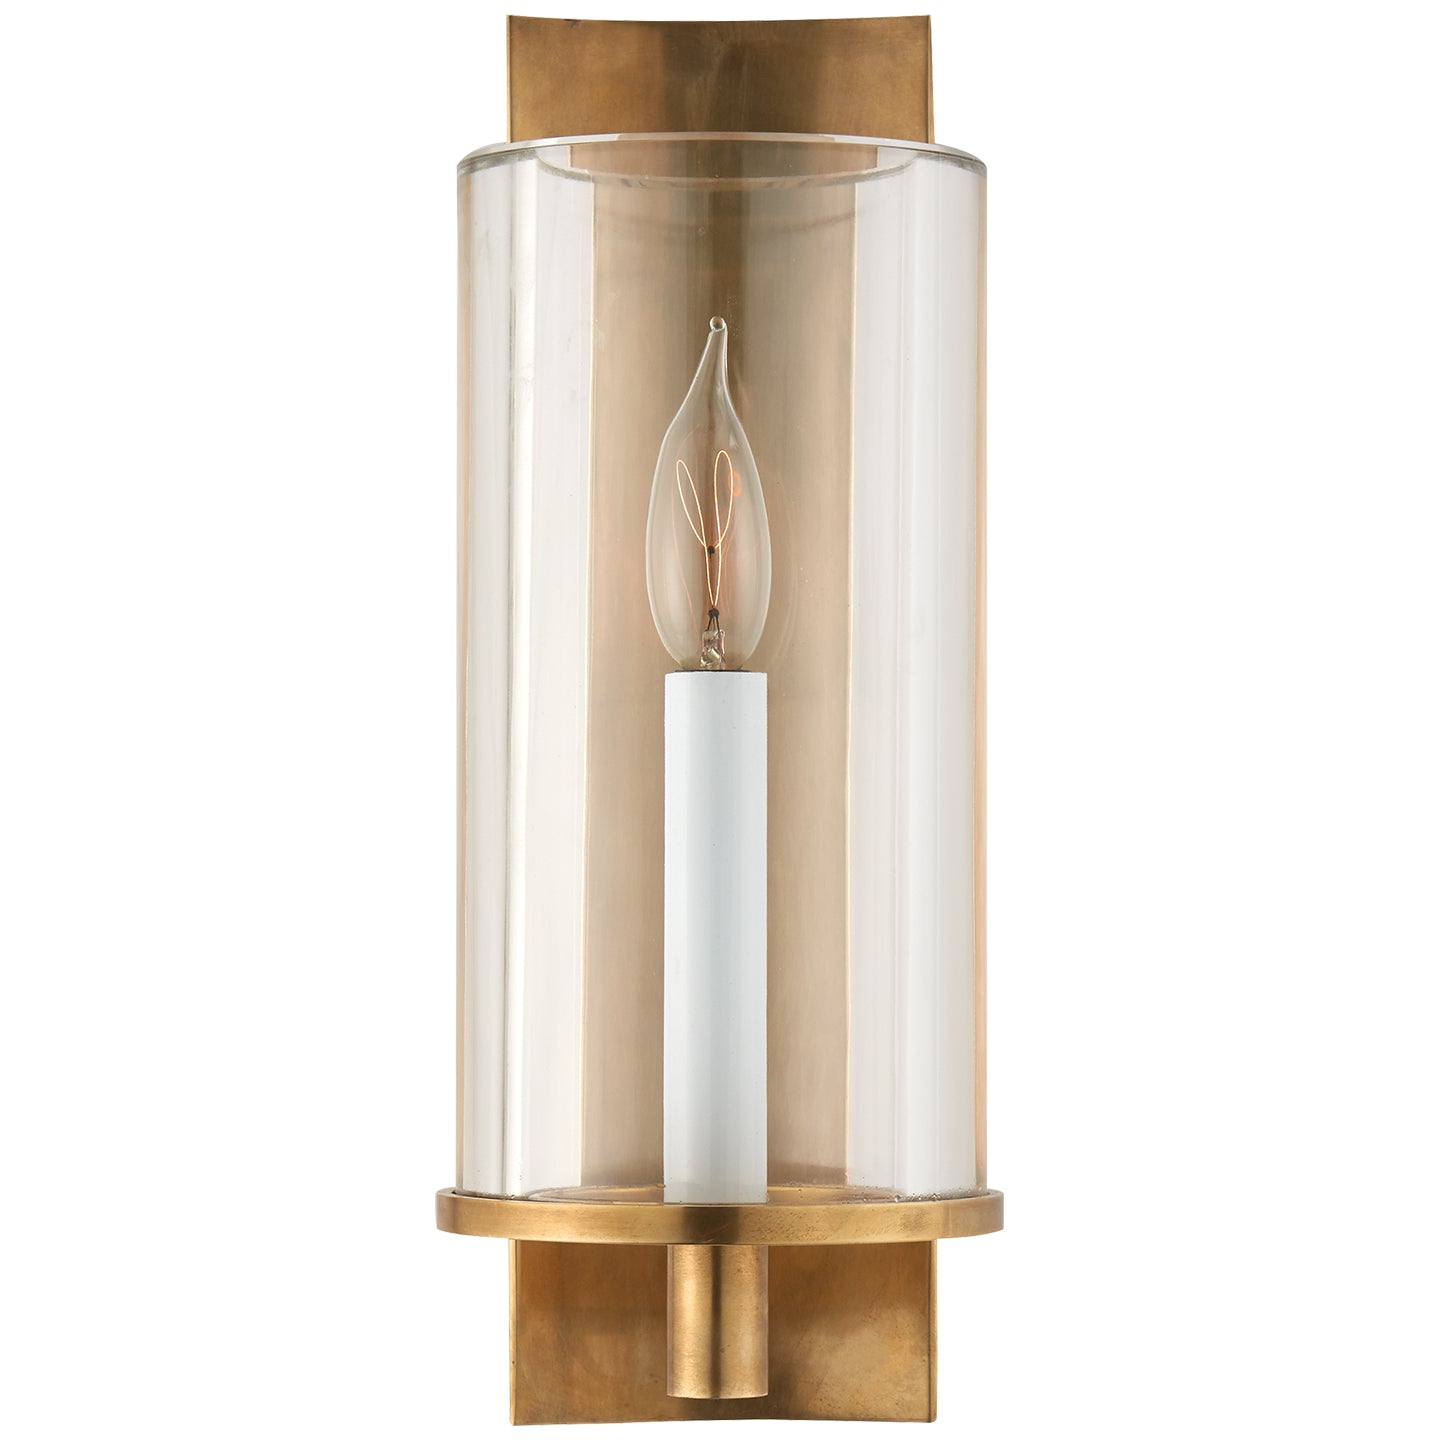 Visual Comfort Signature - ARN 2010HAB-CG - One Light Wall Sconce - Deauville2 - Hand-Rubbed Antique Brass